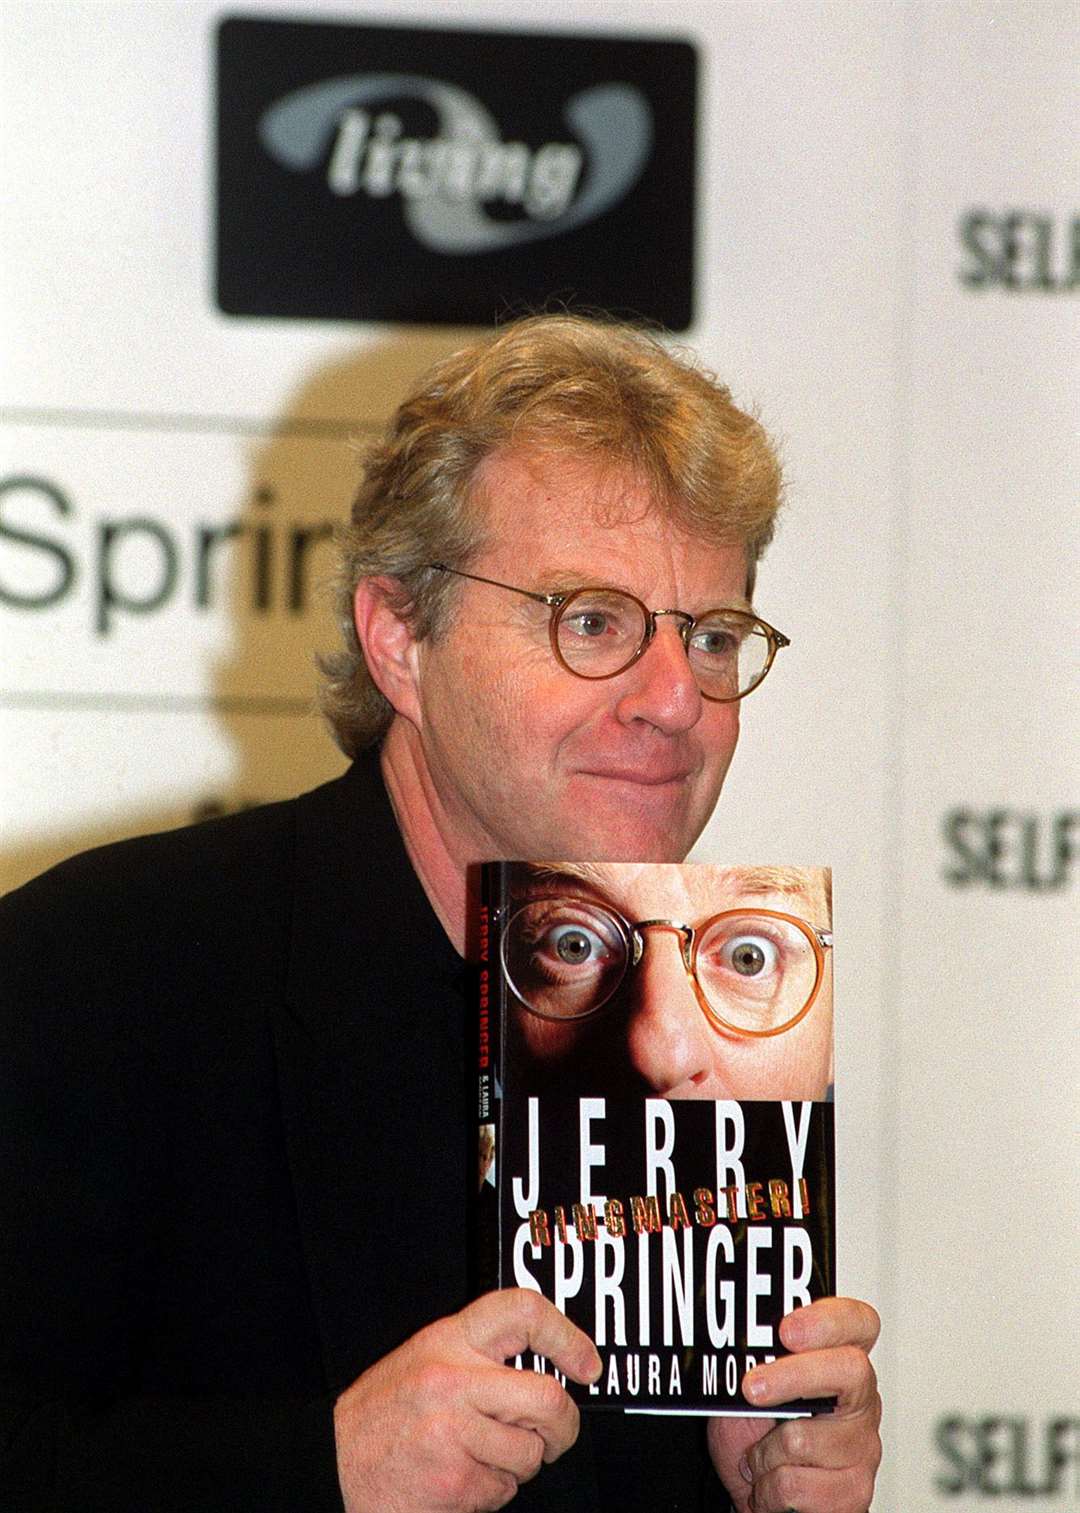 Jerry Springer signed copies of his book Ringmaster in London (PA)